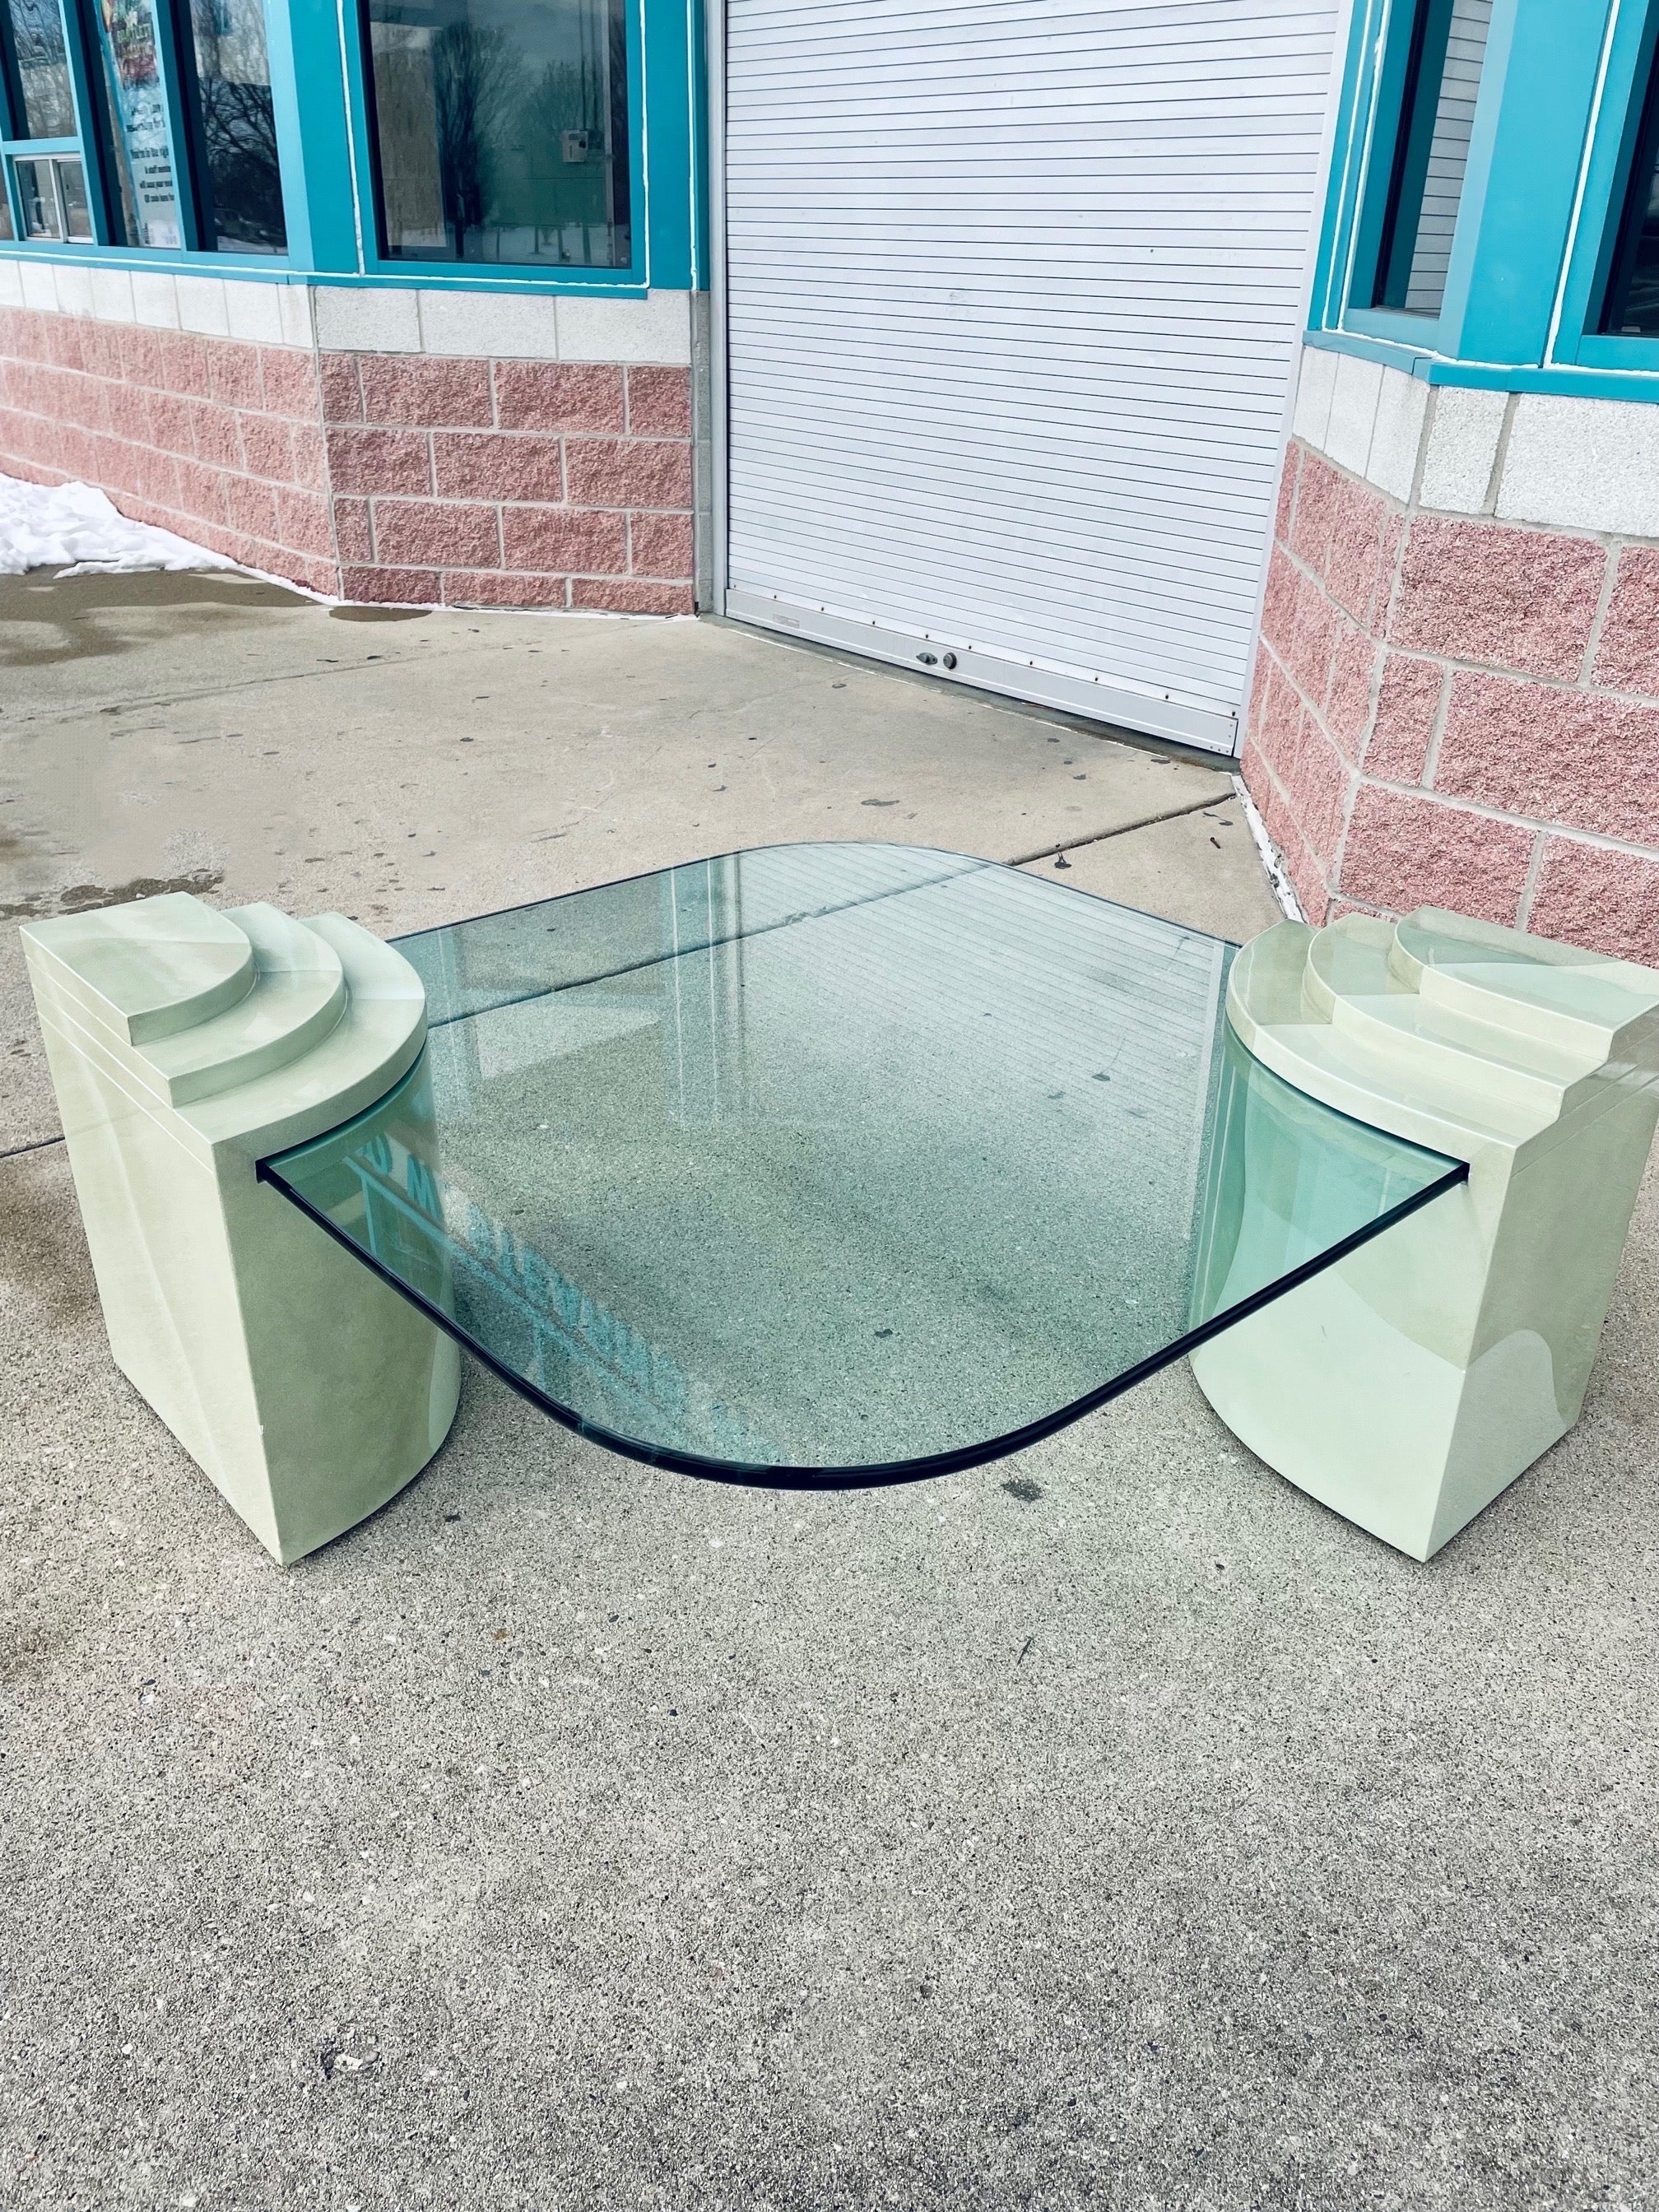 Absolutely striking Postmodern glass tiered base Ombre coffee table. This glass vintage beauty is rare with its multi green colored bases. This rare find is sure to make a statement in any unique interior space. The layout of the table can be placed